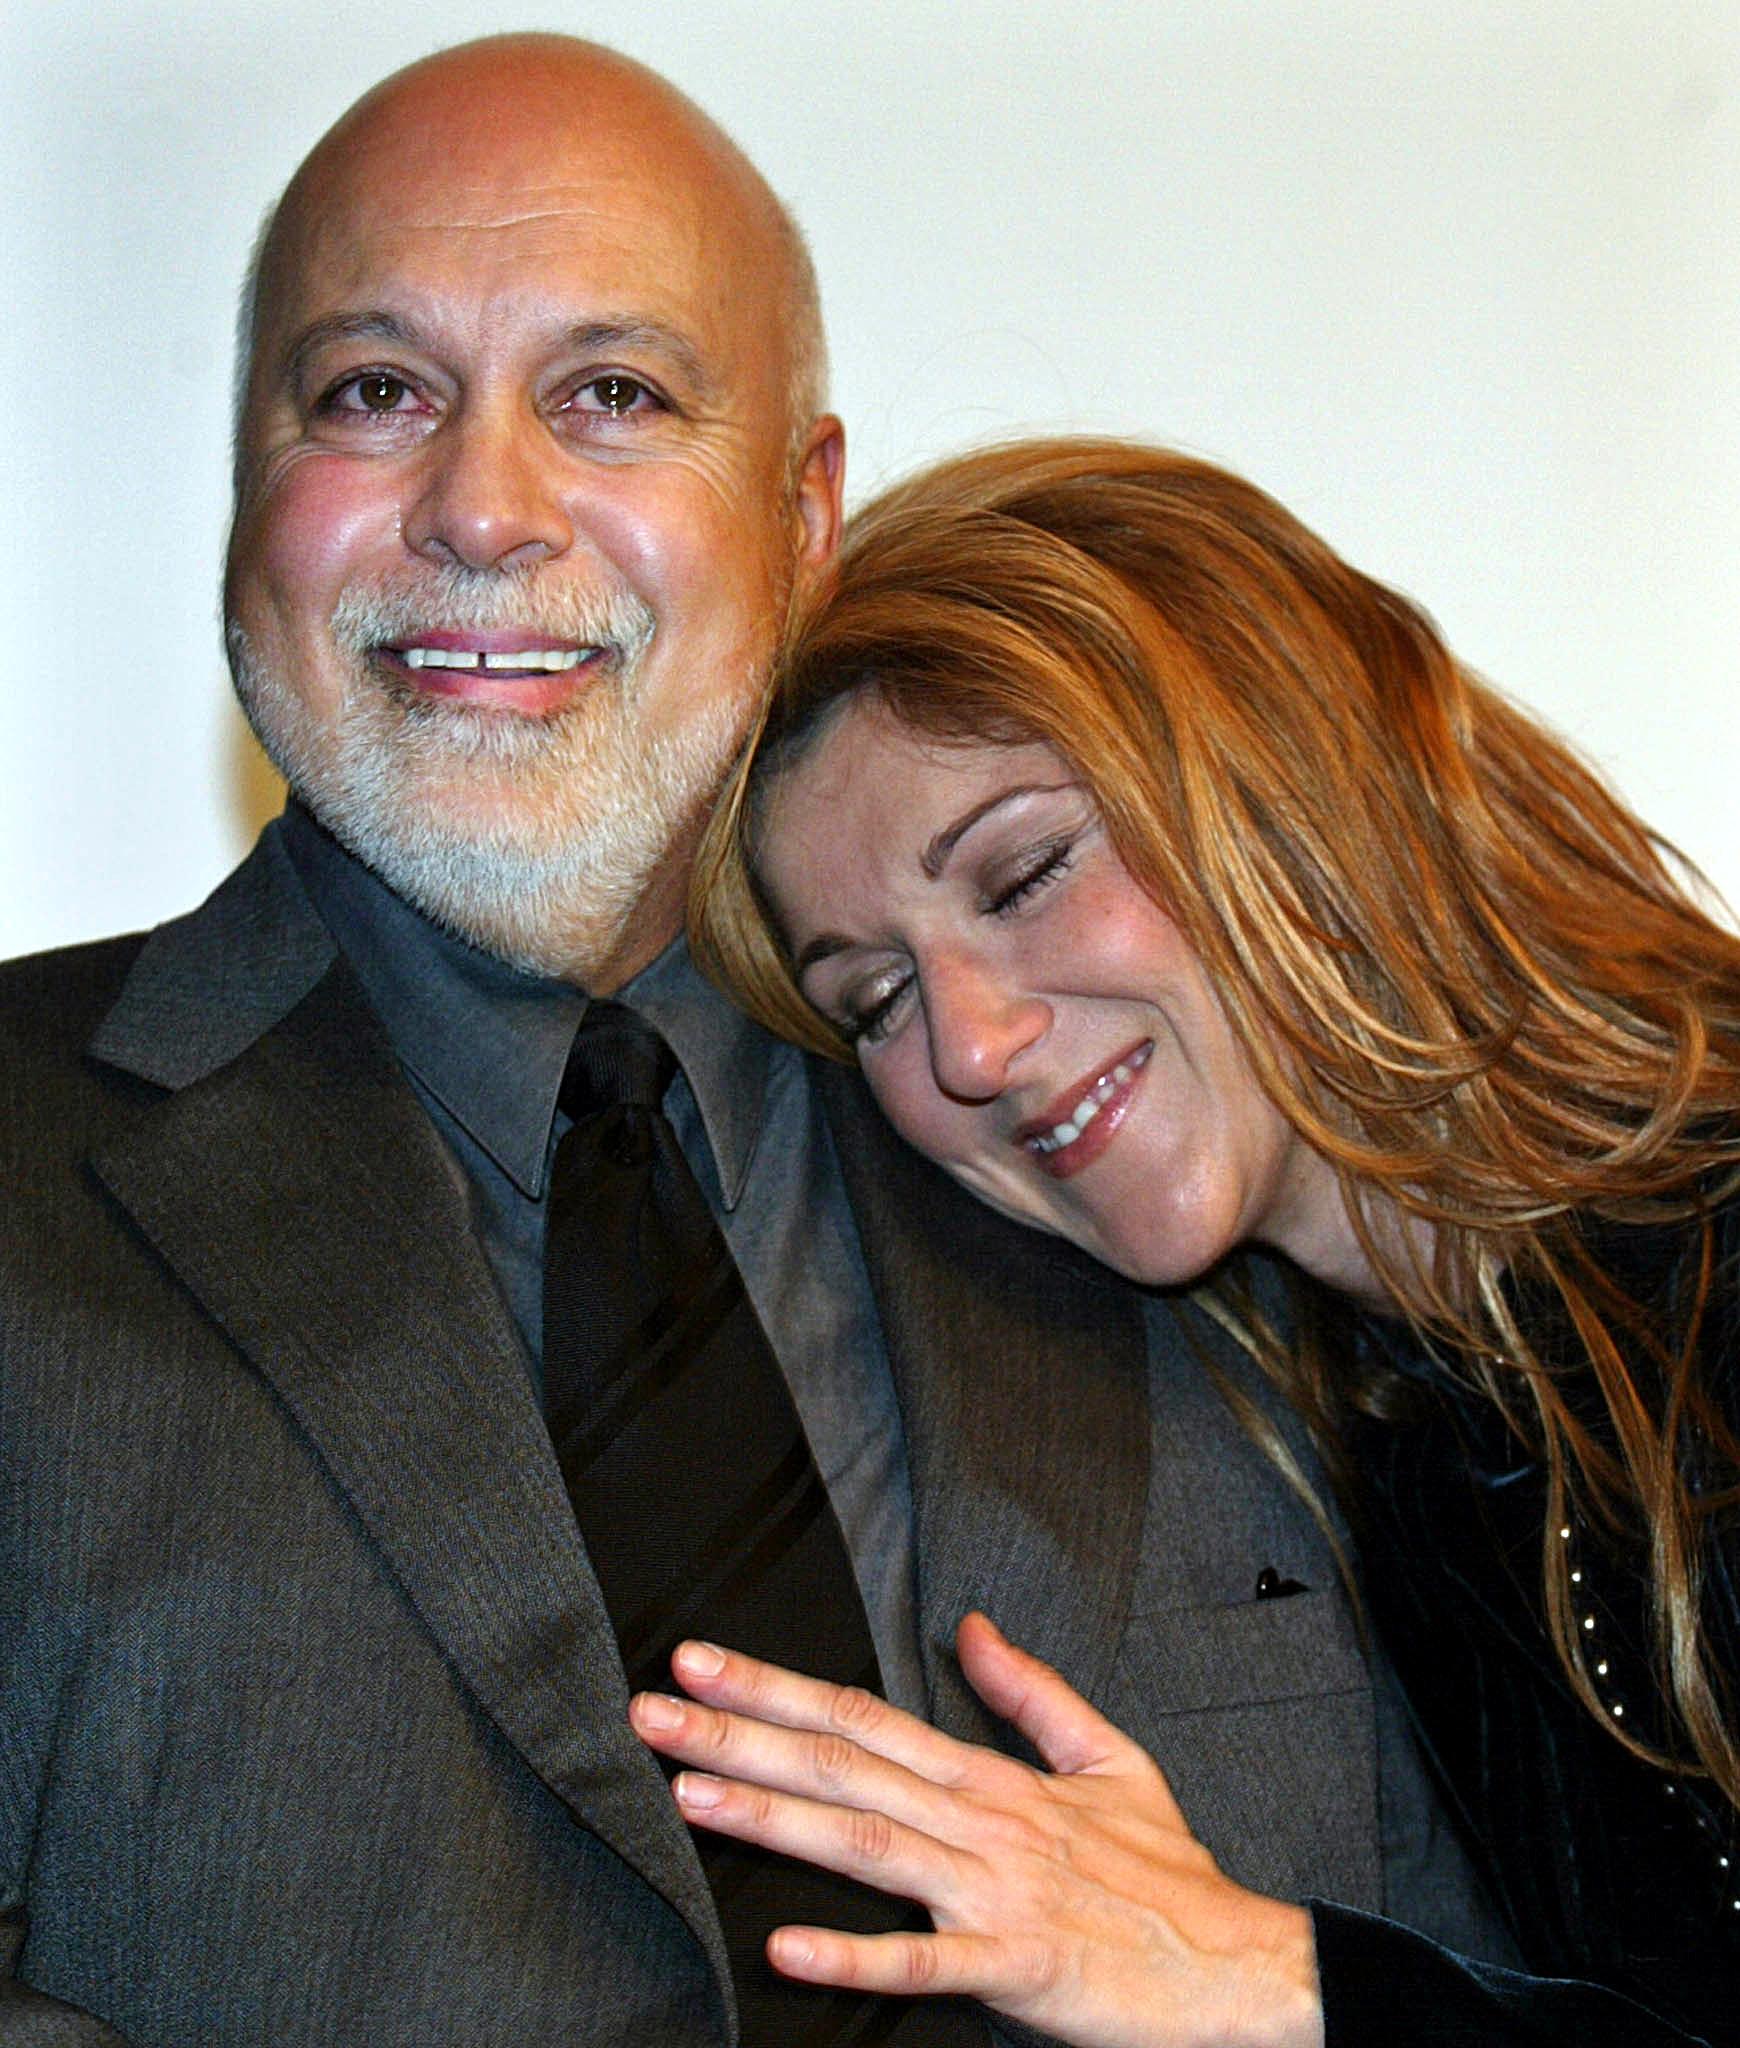 Rene Angelil and his wife, Celine Dion during a news conference at Sainte-Justine Children's Hospital on December 18, 2002 in Montreal, Canada. / Source: Getty Images